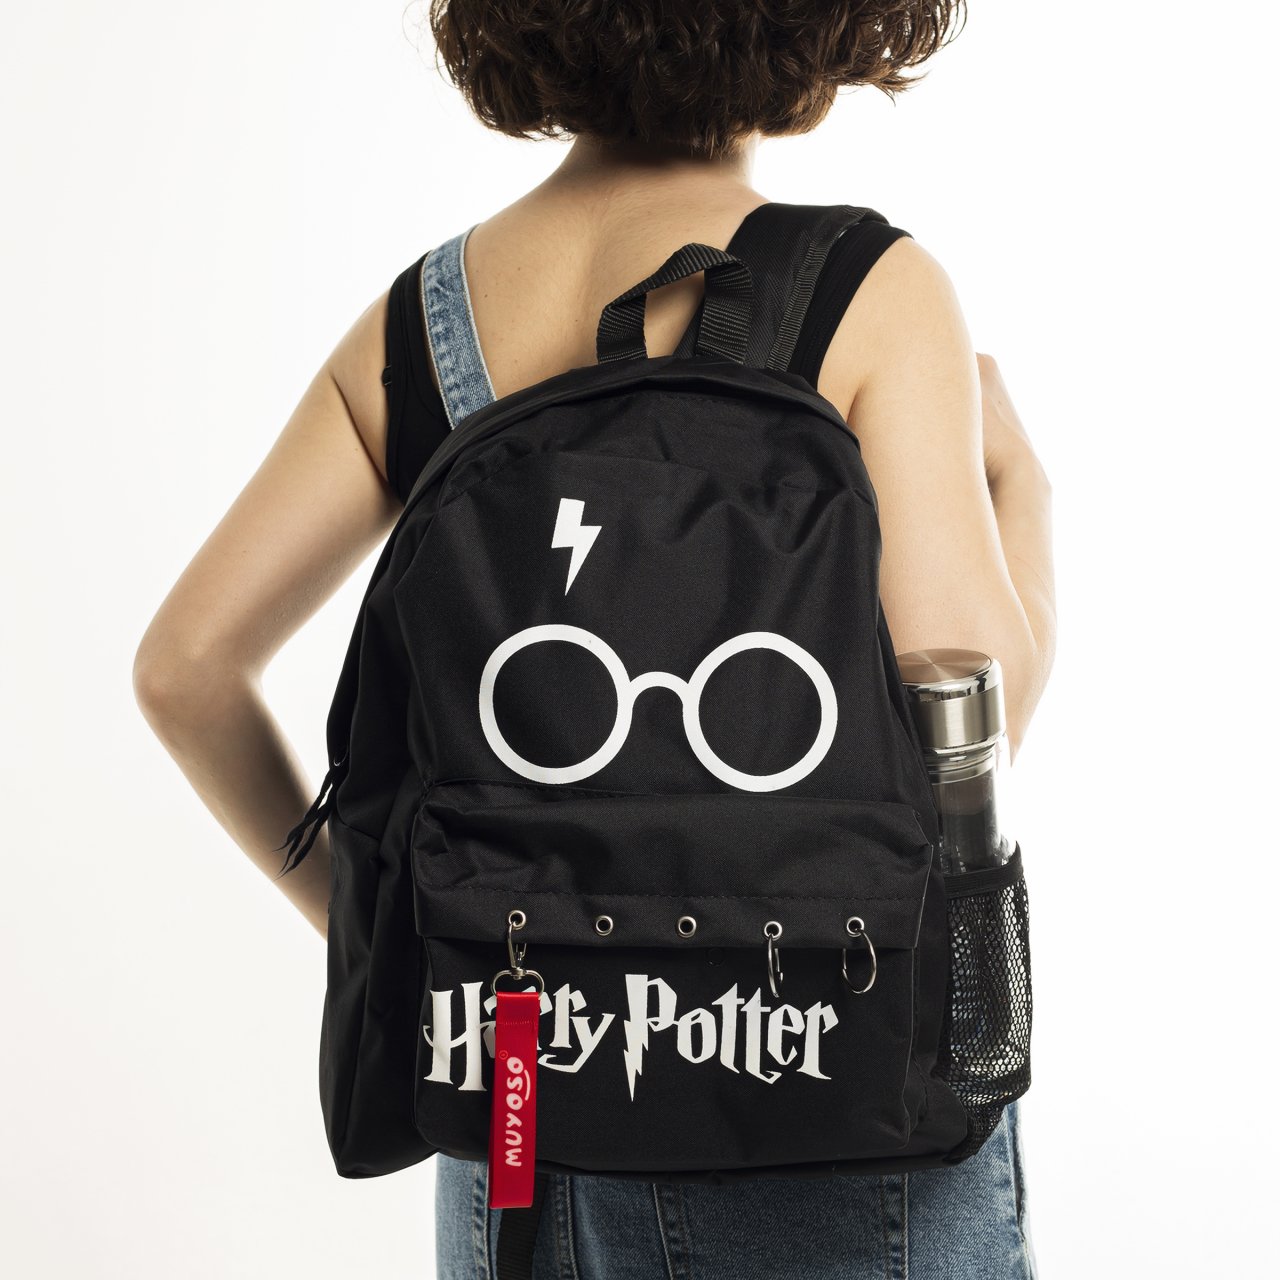 Harry potter with key chain